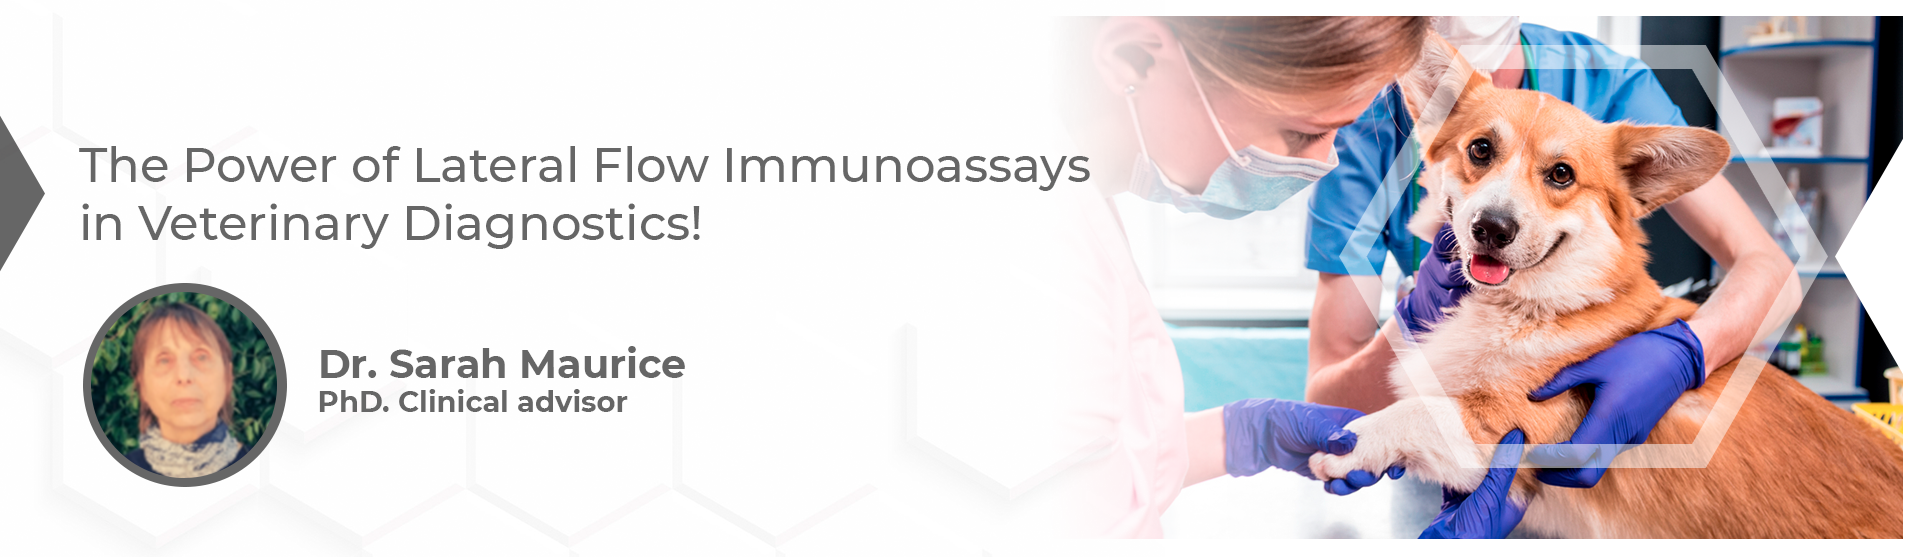 The Power of Lateral Flow Immunoassays in Veterinary Diagnostics!